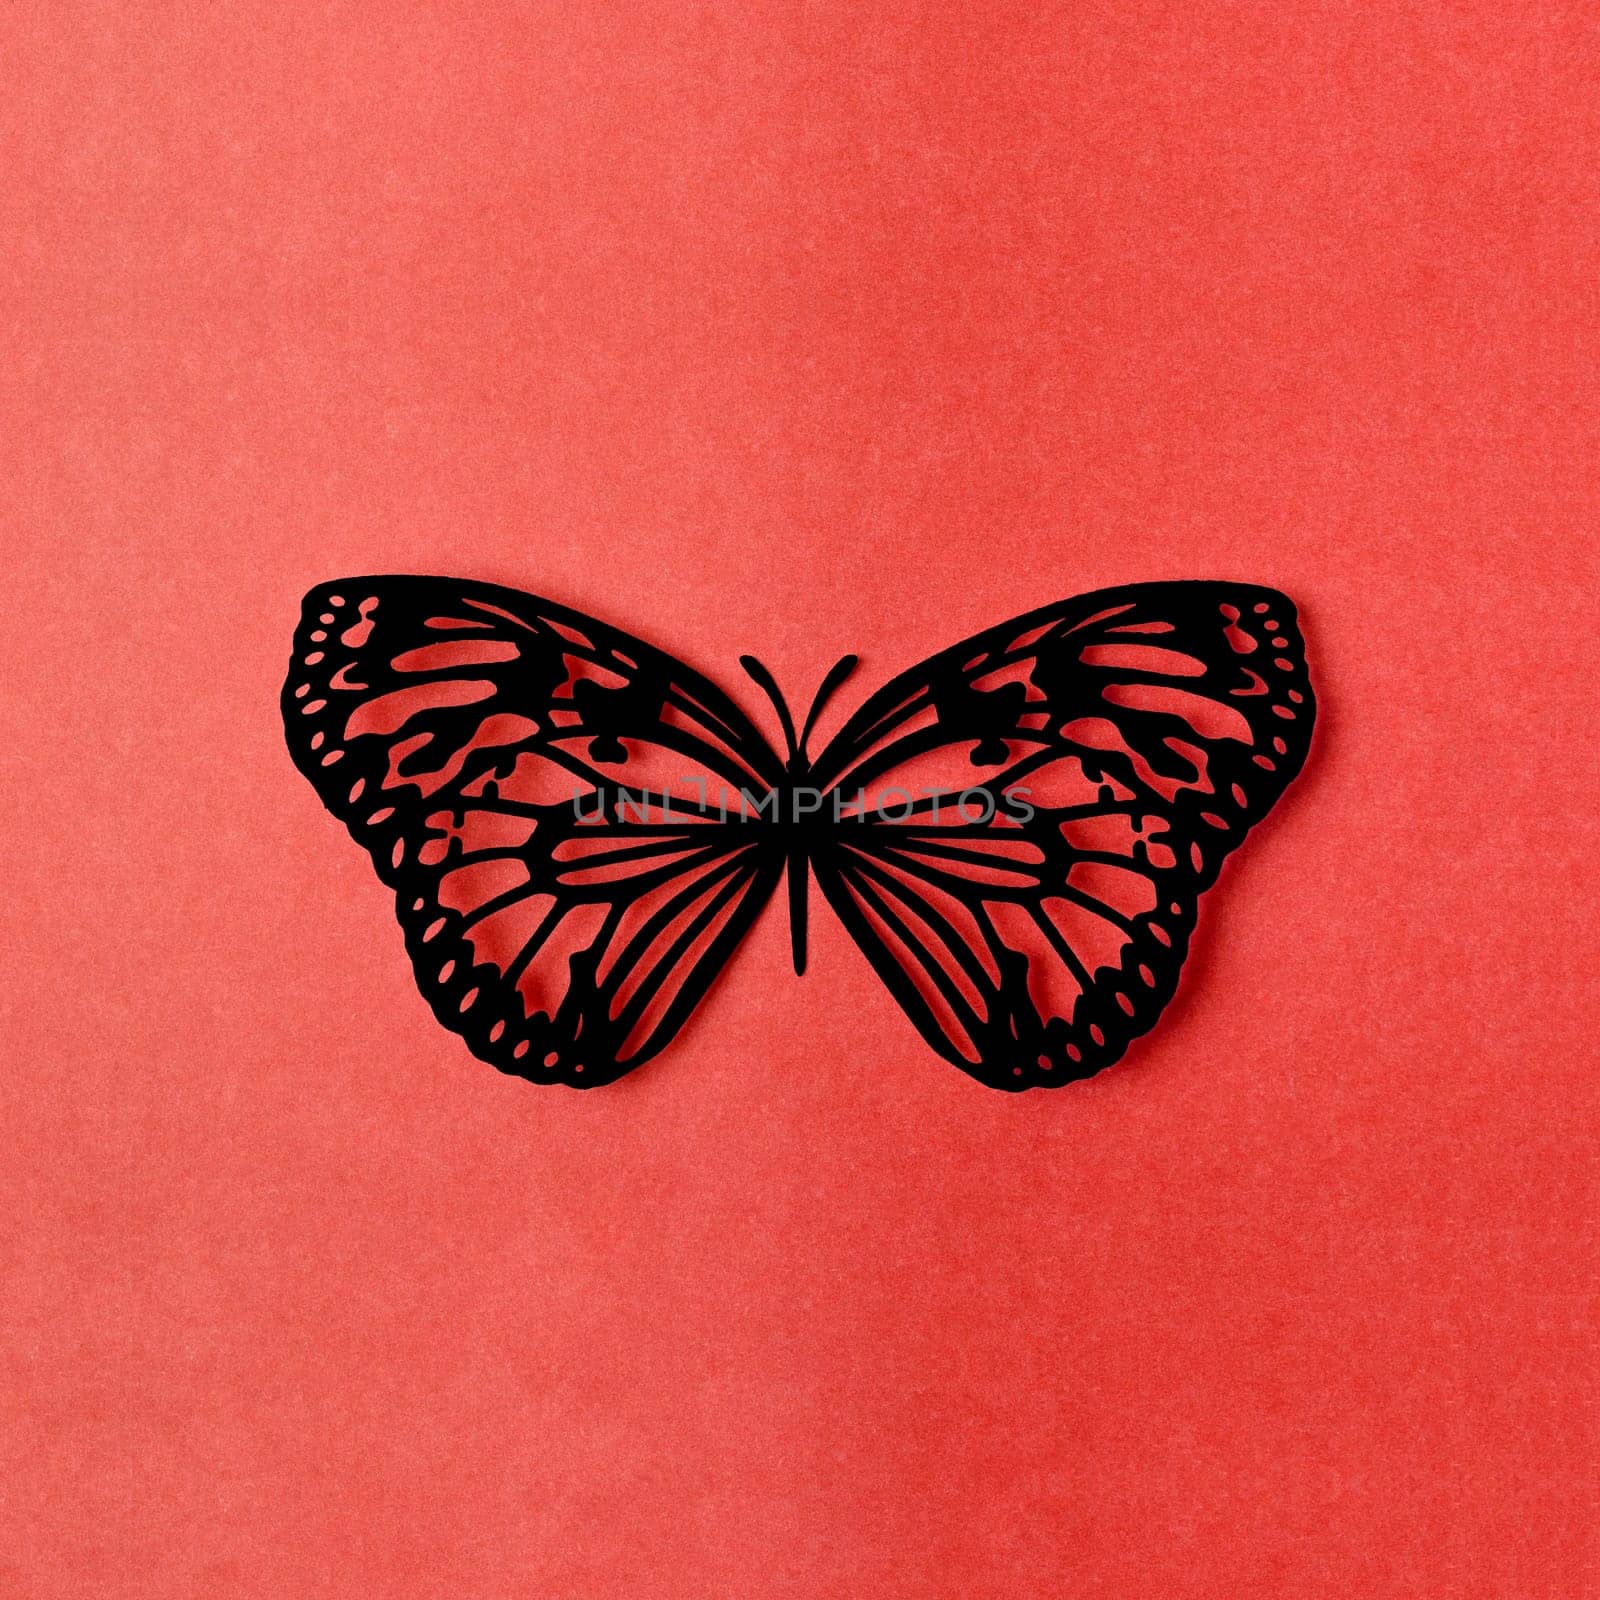 A Black color paper butterfly carve on a red background. by Gamjai